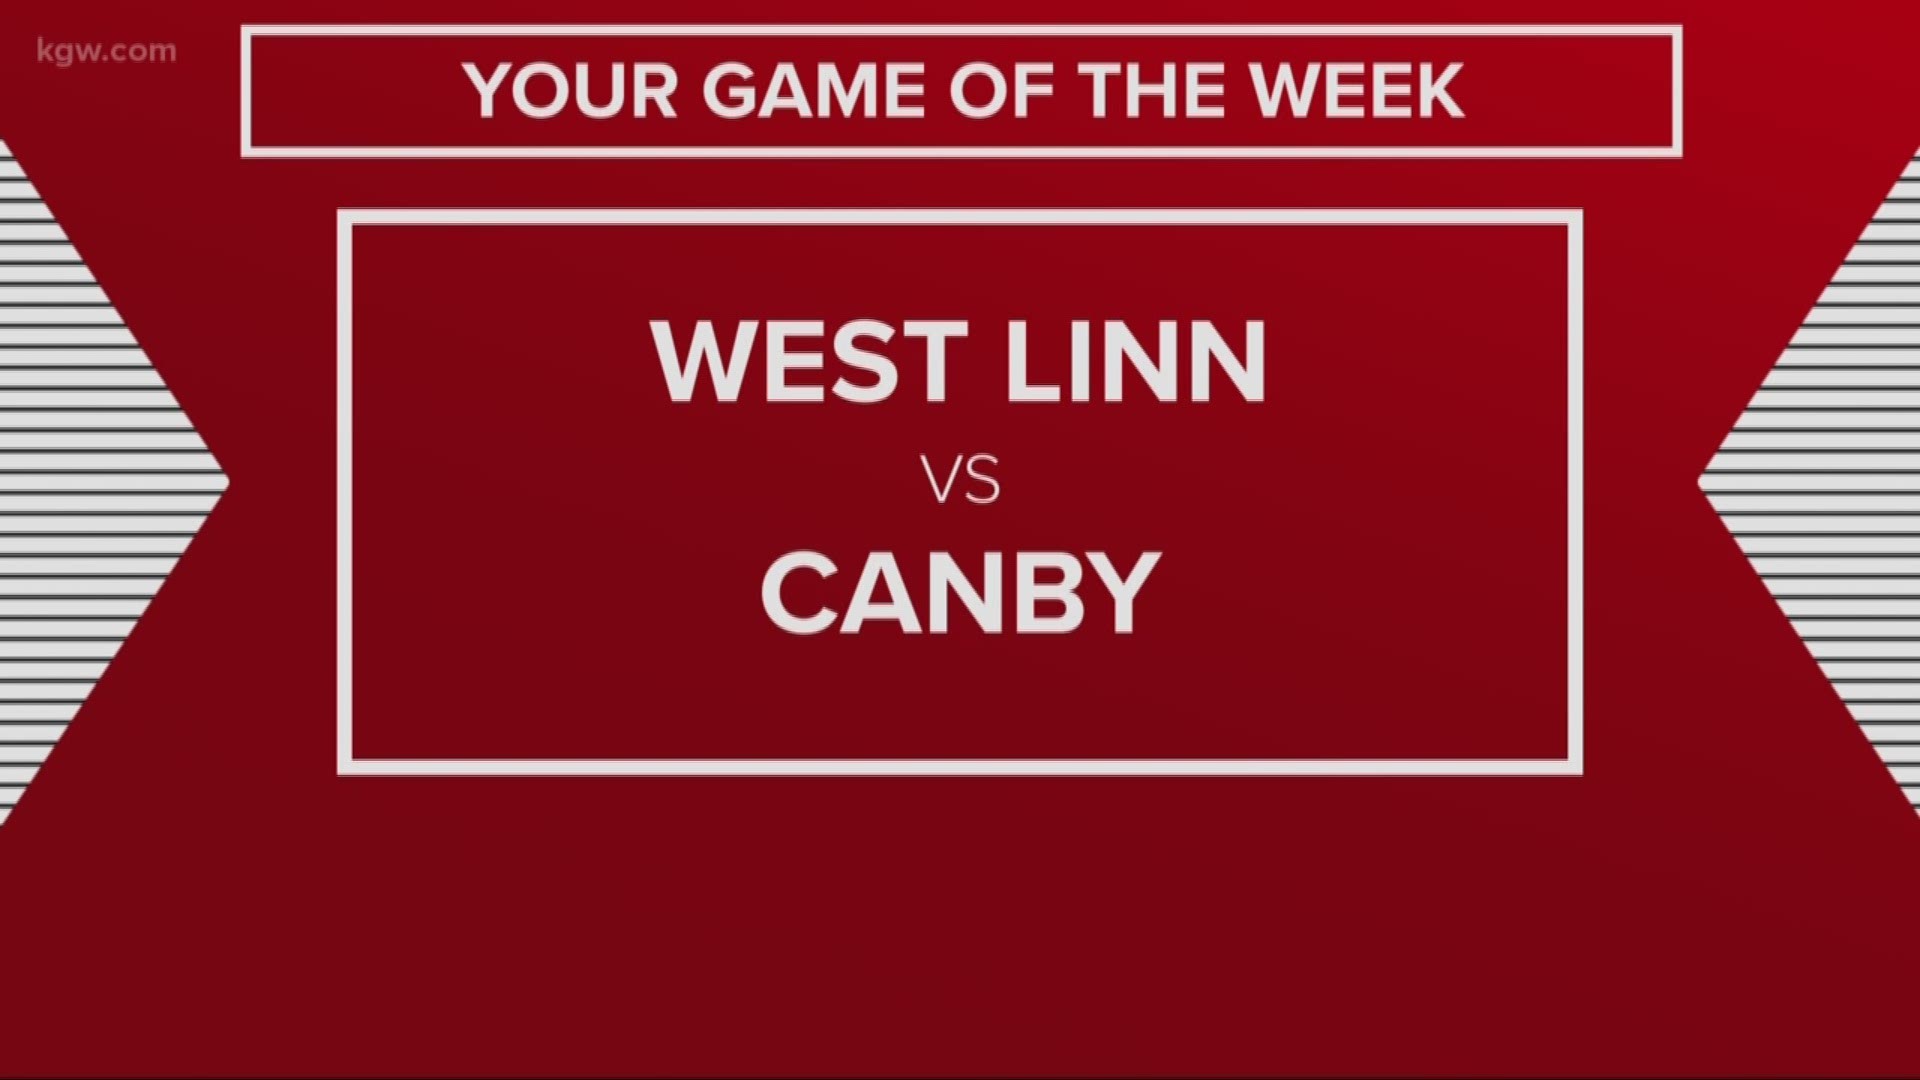 West Linn at Canby is your Friday Night Hoops Game of the Week!